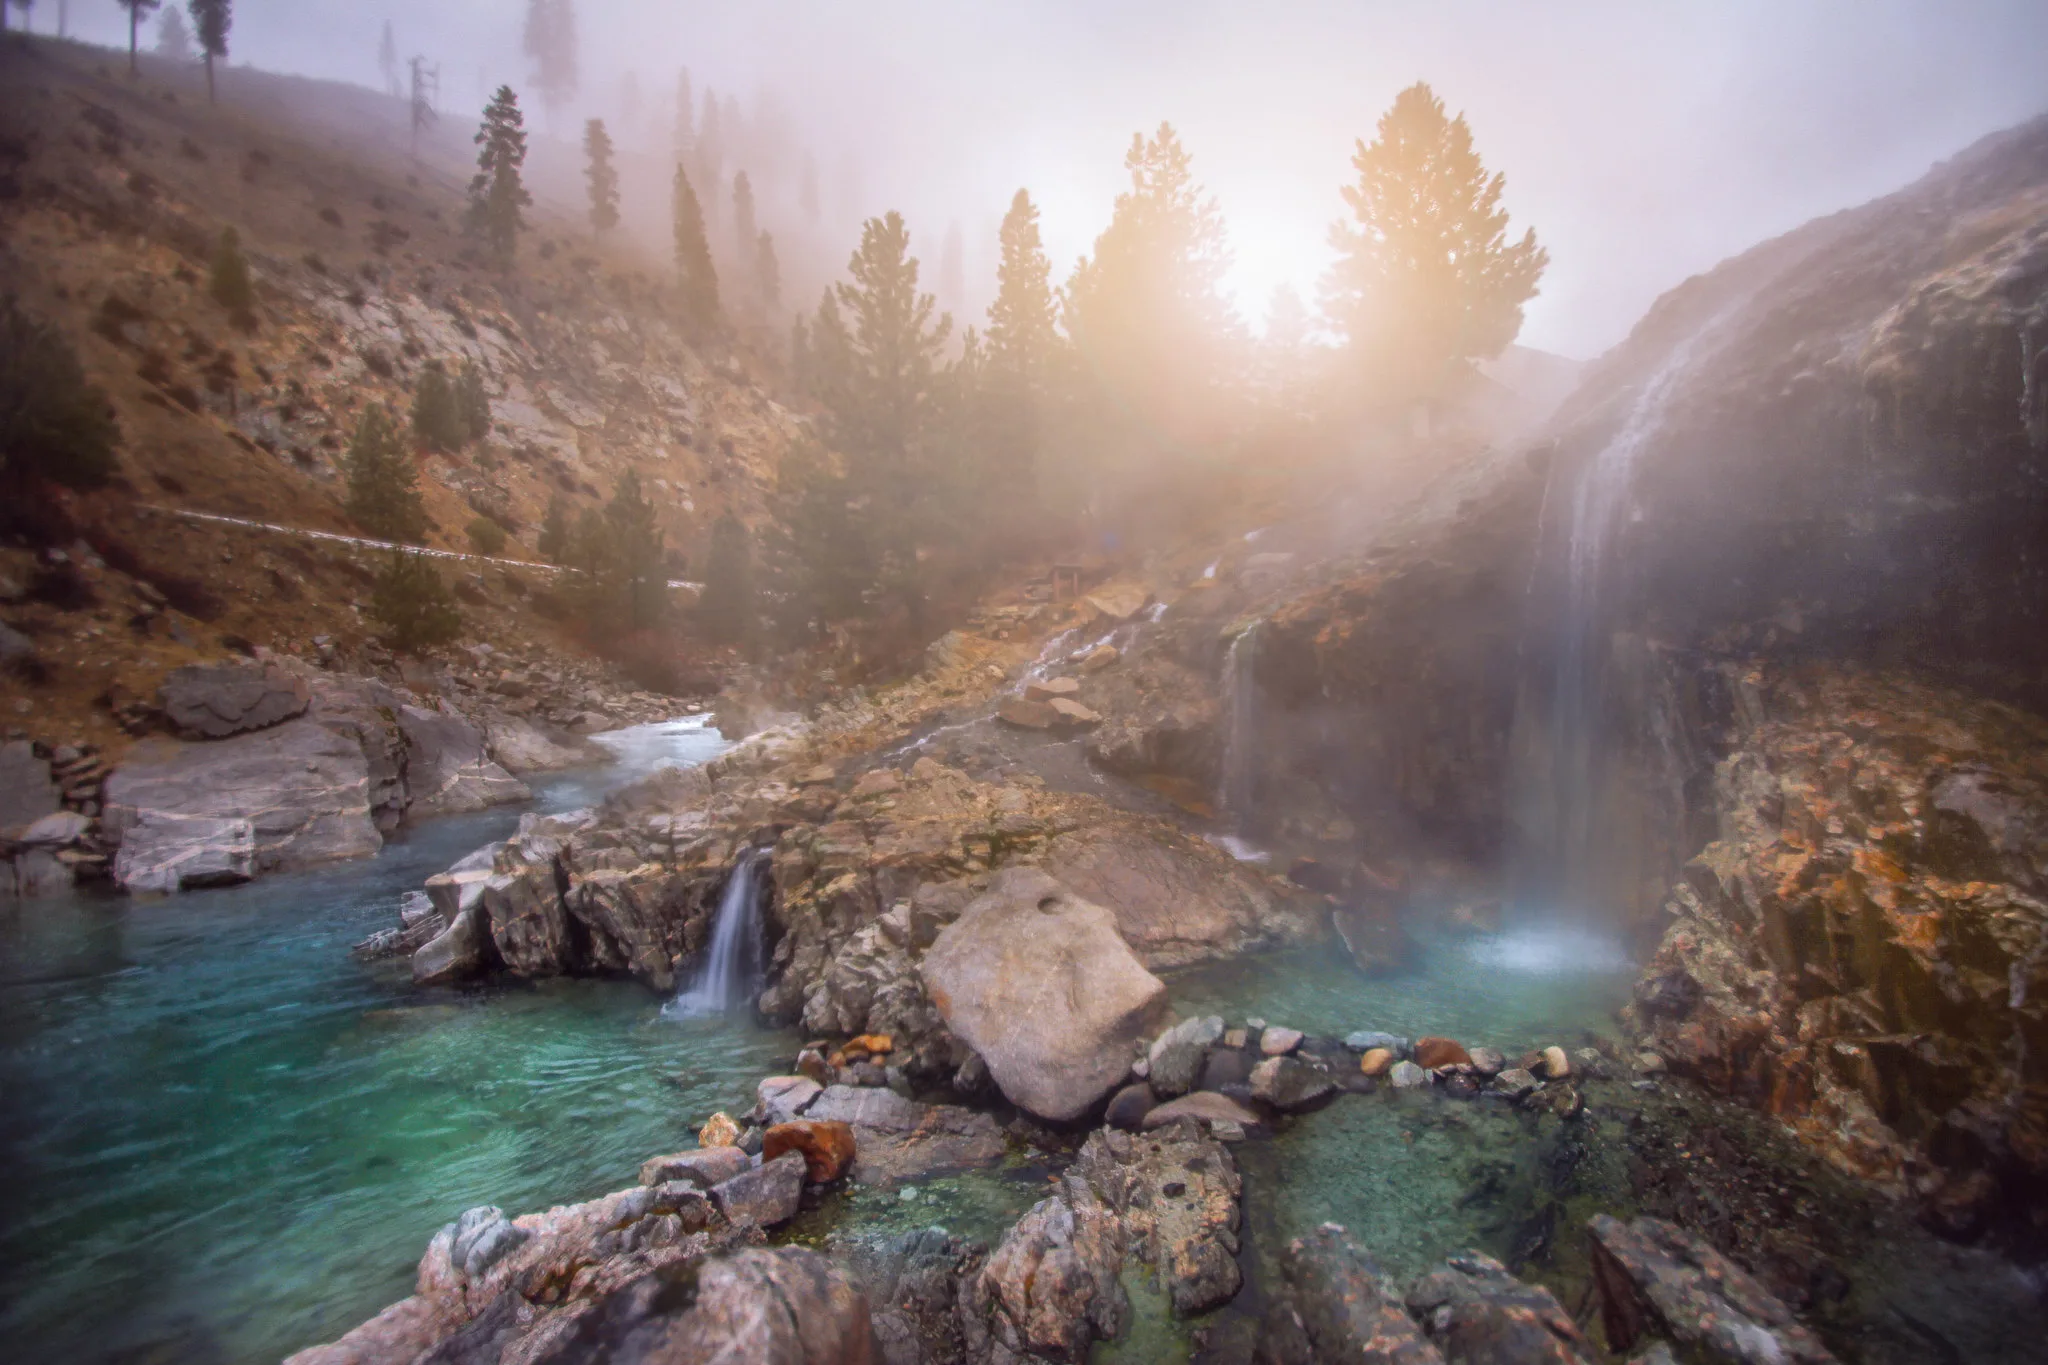 Steamy Kirkham Hot Springs pictured on a bright foggy day as a piece on the best things to see in Idaho